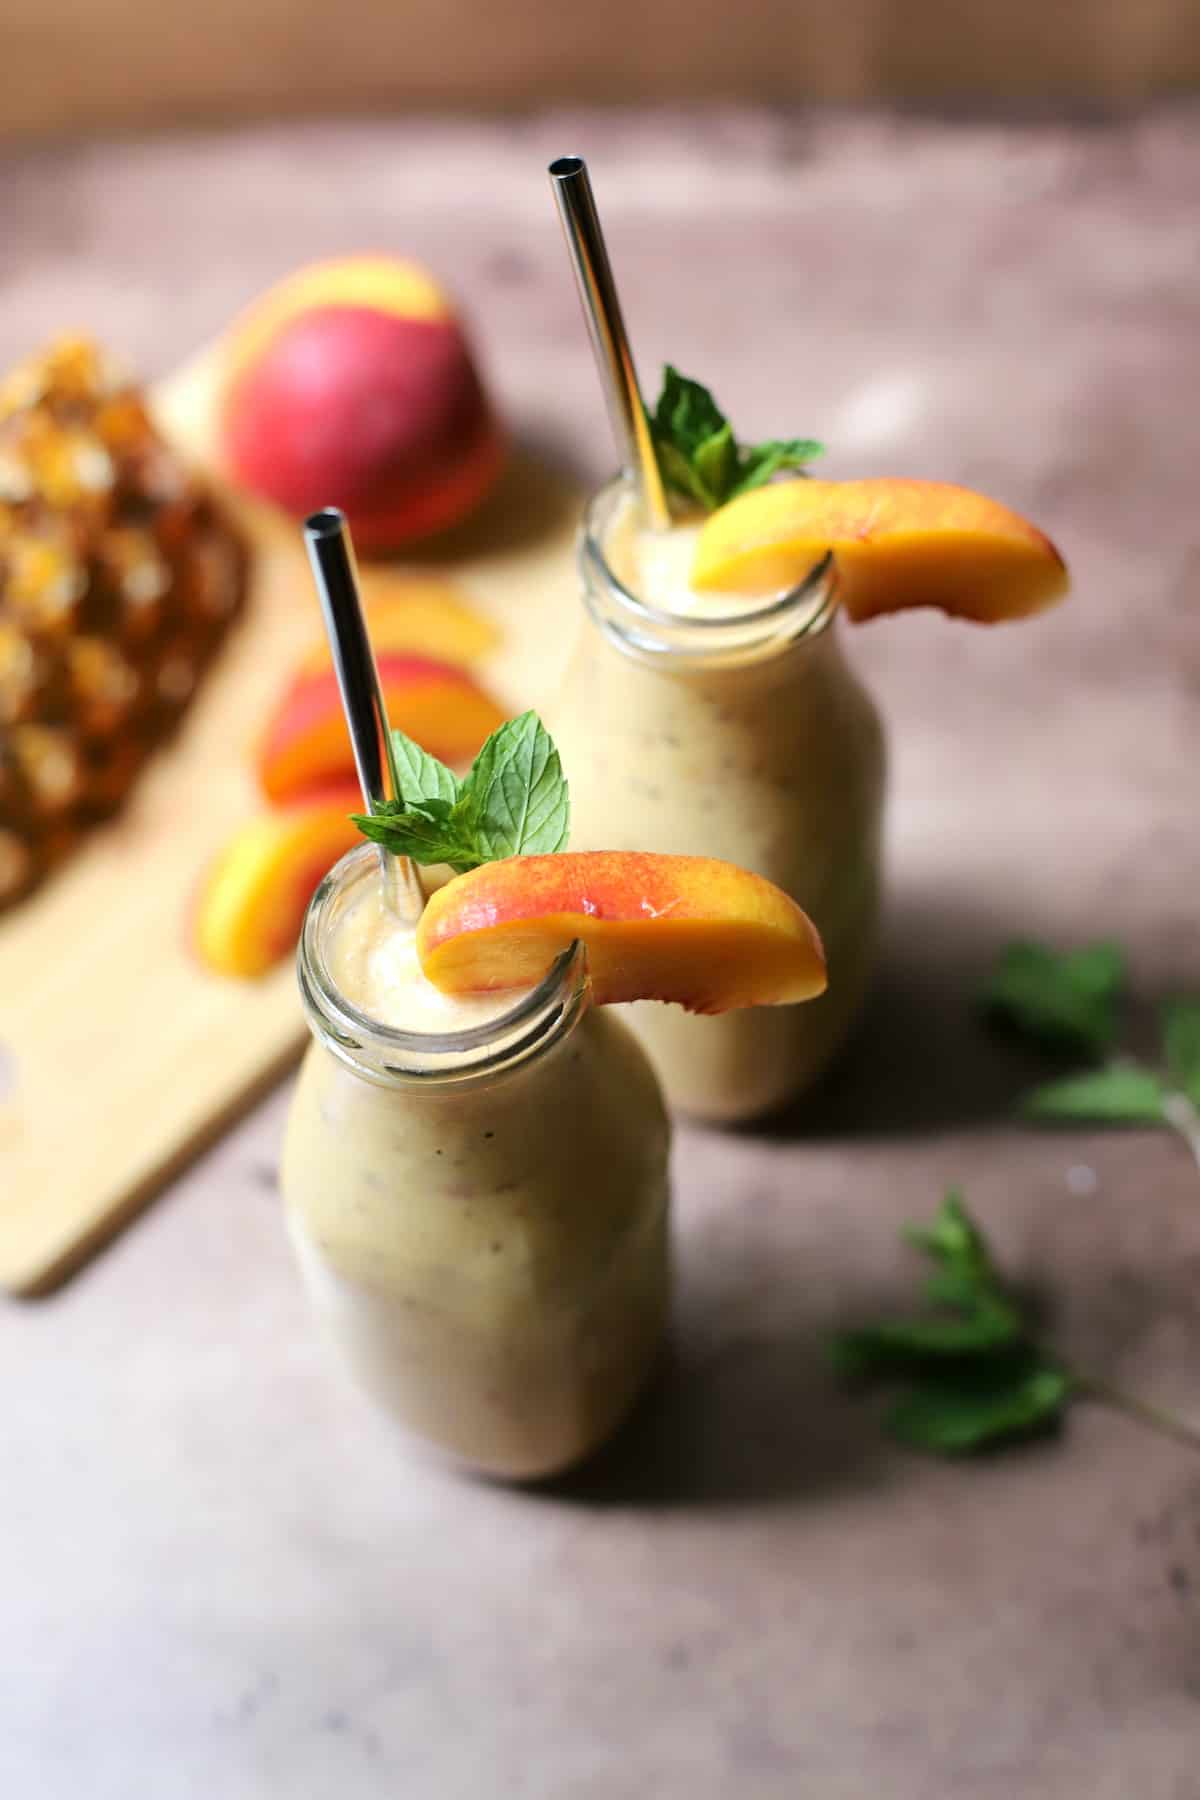 Peach smoothie in a bottle.